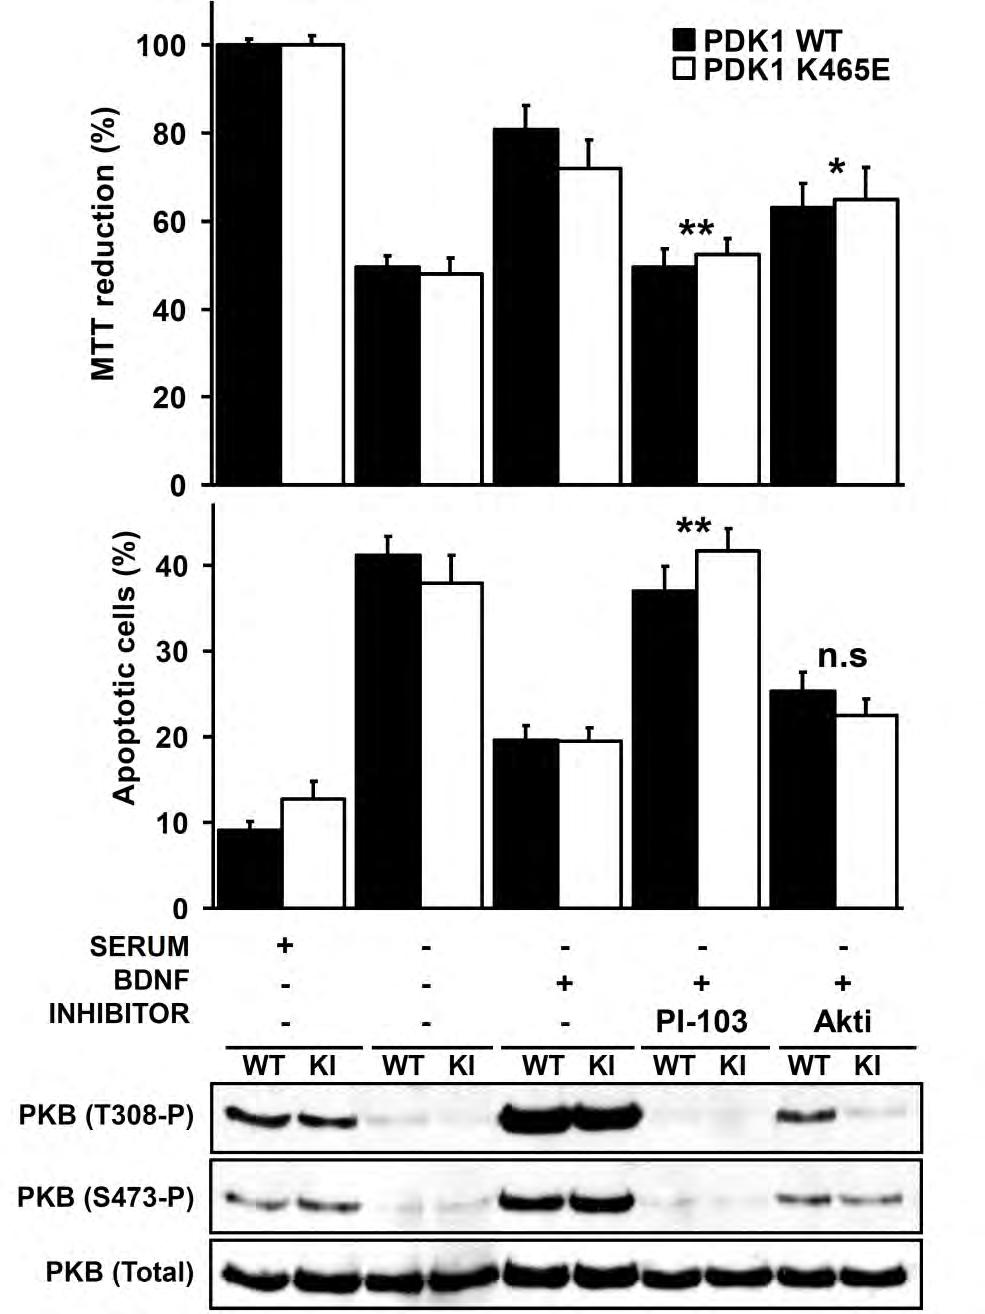 Results phosphorylation levels at both Thr308 and Ser473 sites, whereas the PI-103 inhibitor totally wiped out the PKB phosphorylation signal at both sites (Fig. 24).